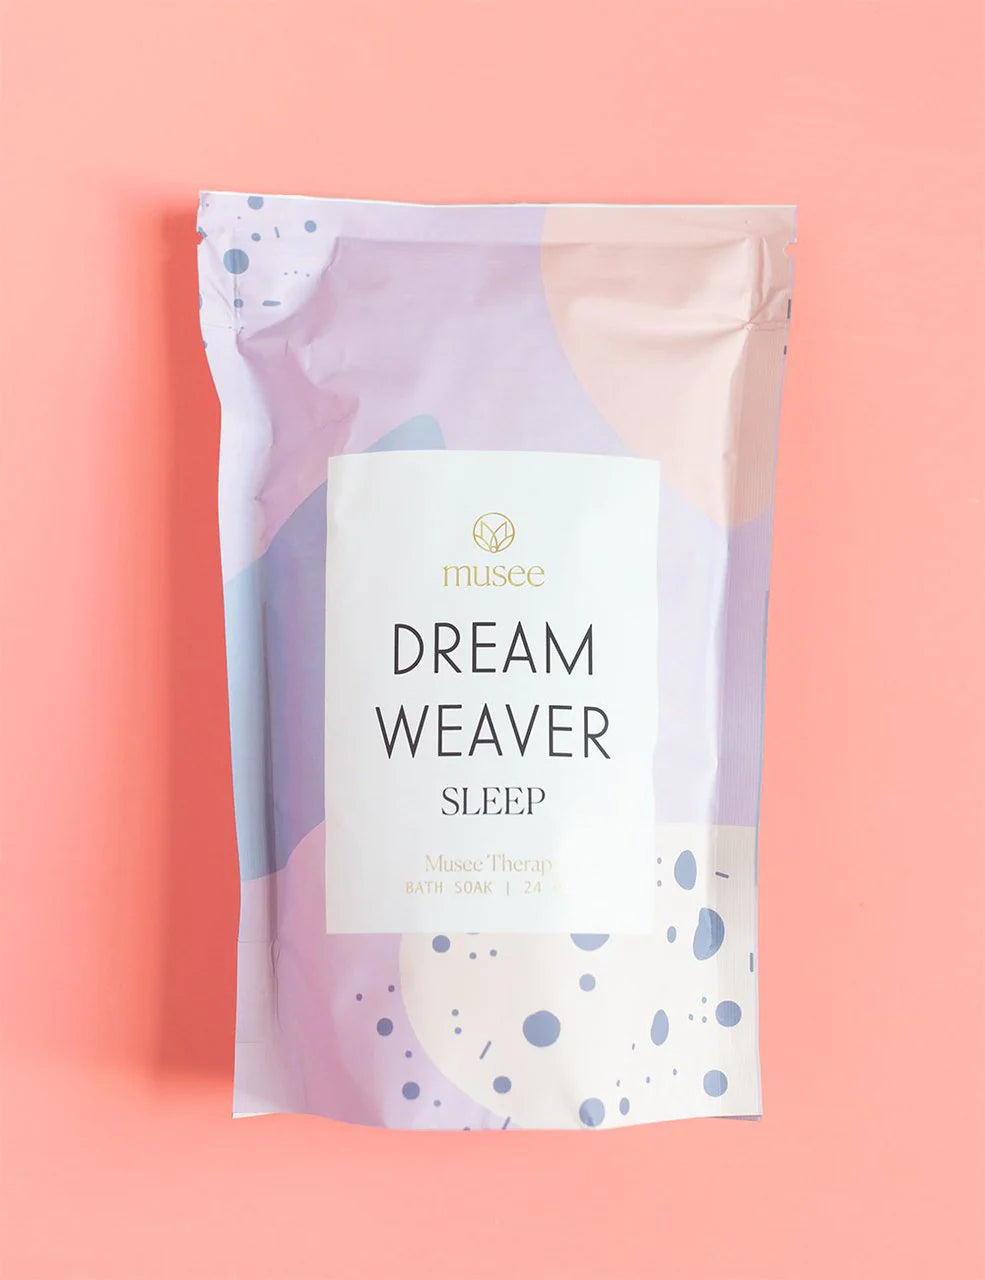 Relaxation at its finest, as Musee's Dream Weaver Bath Soak indulges in a bath soak on a pink background.